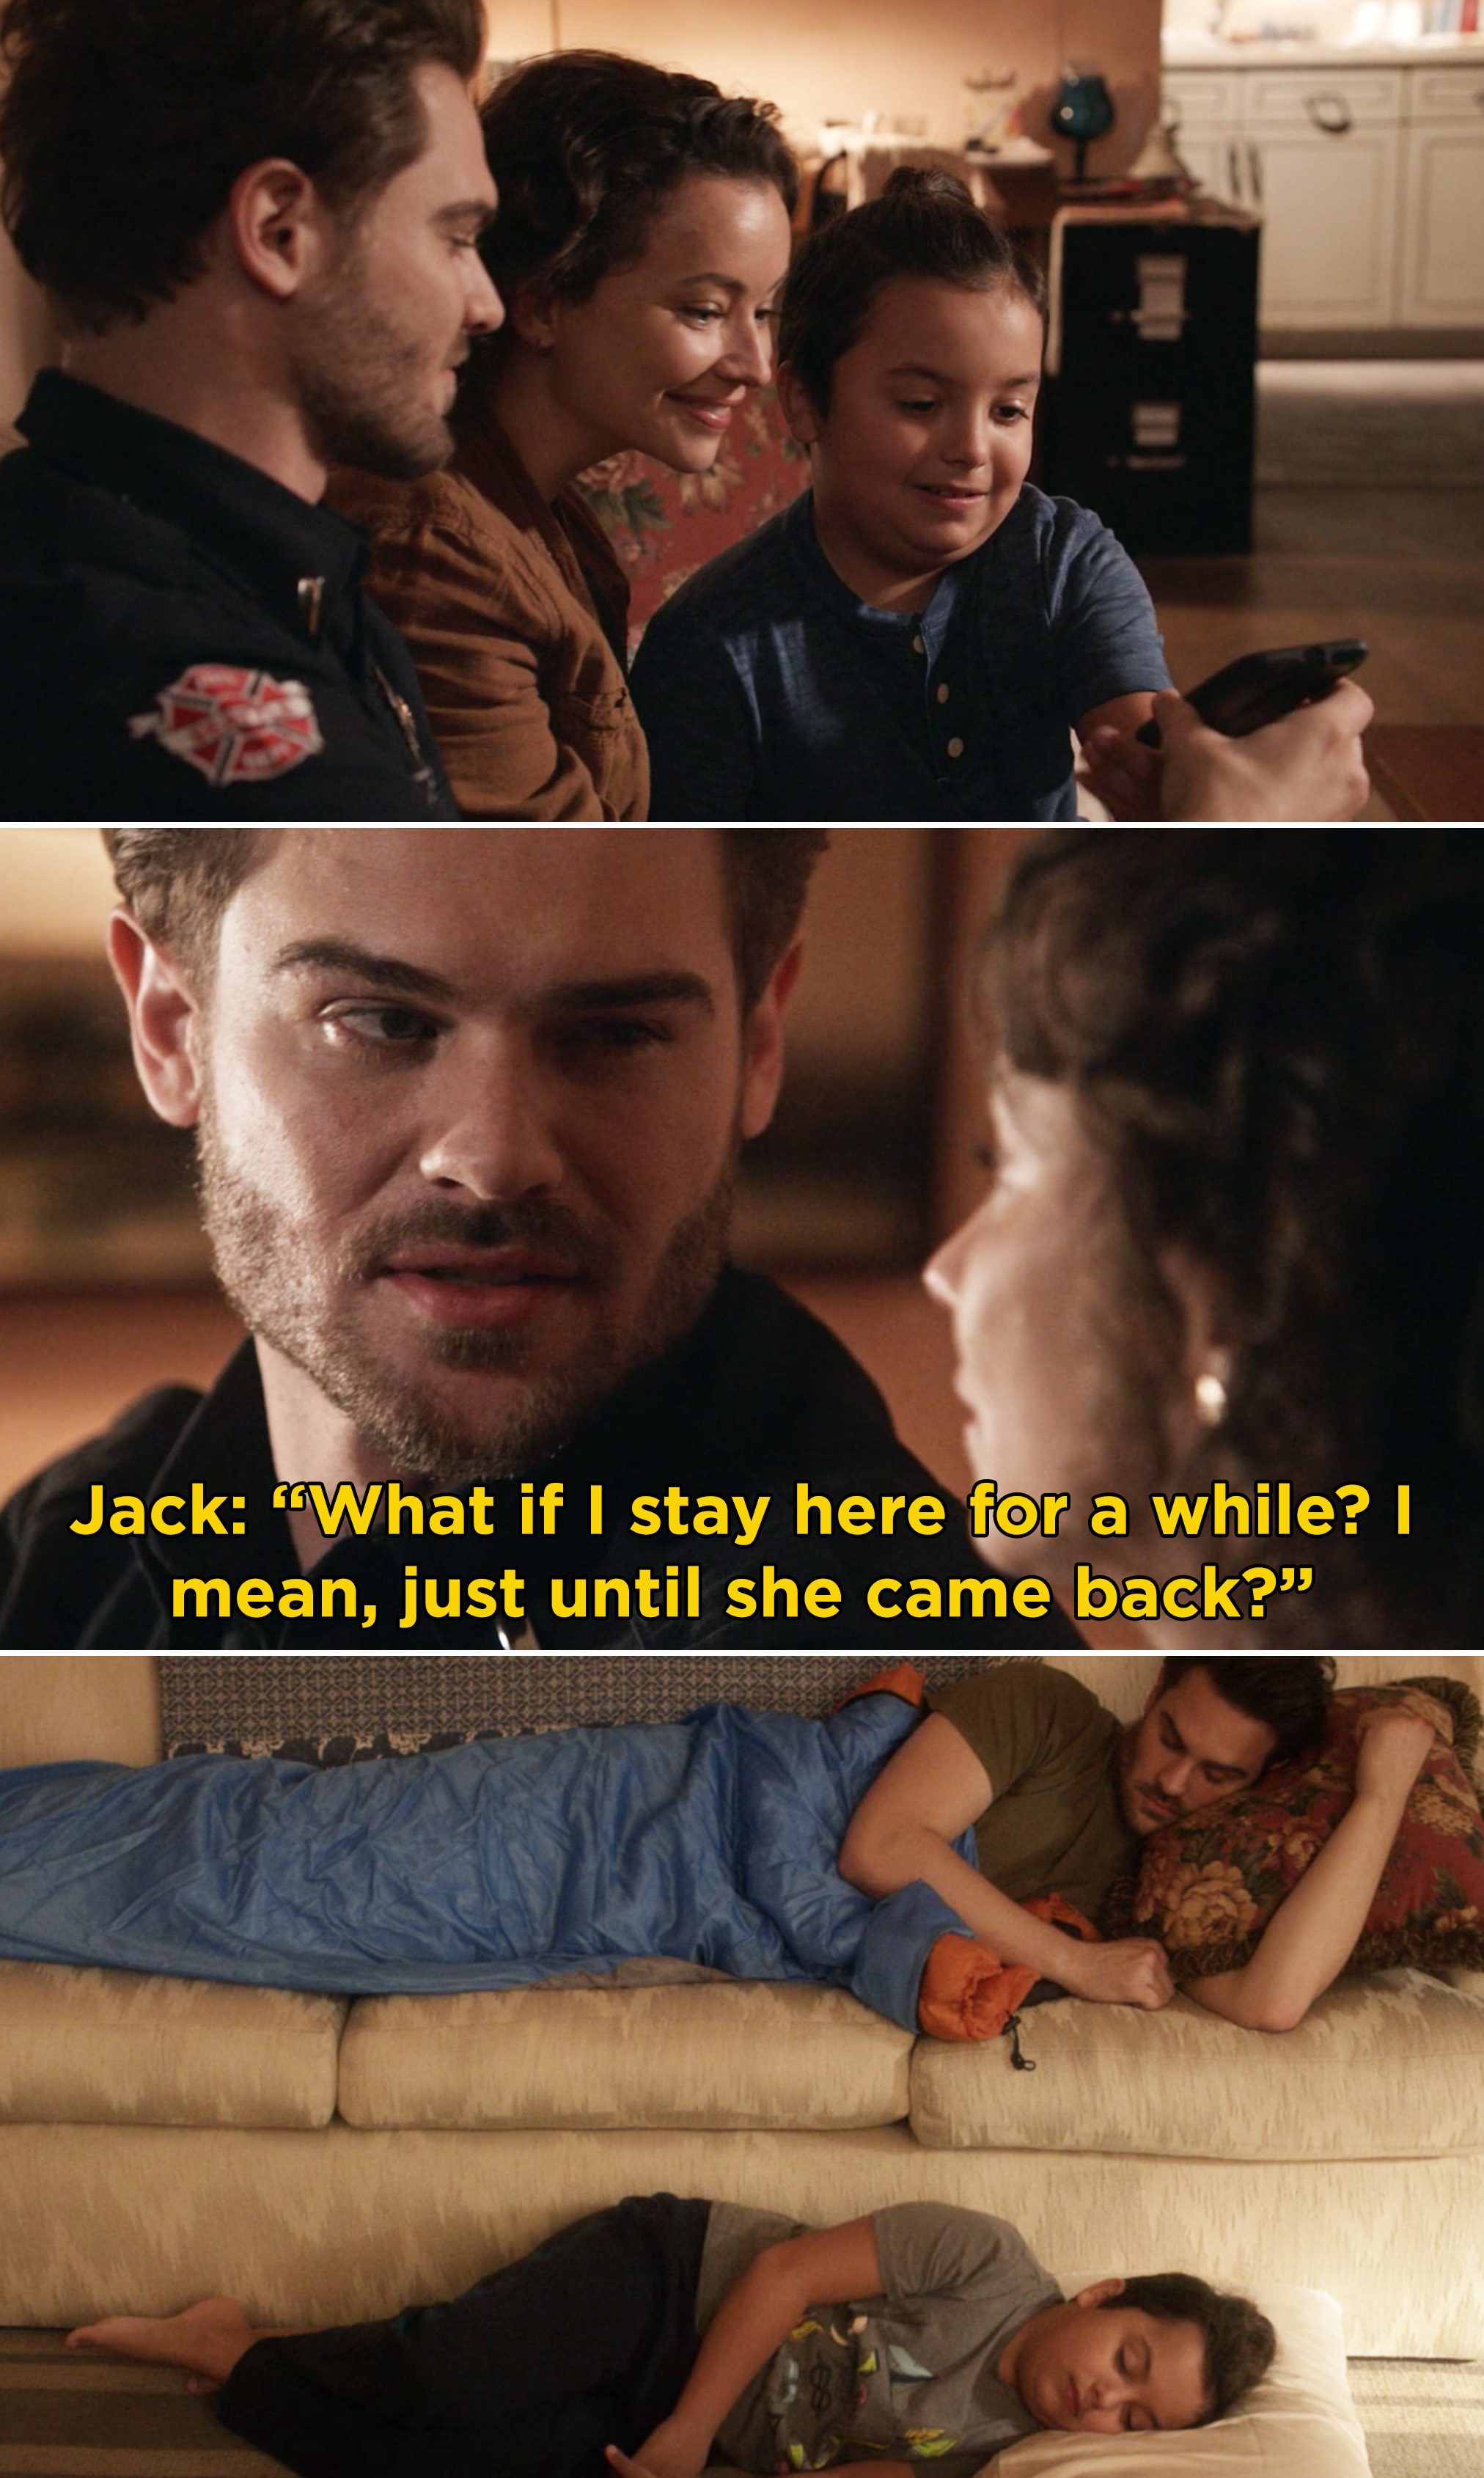 Jack telling Inara, &quot;What if I stay her for a whole? I mean, just until she came back?&quot; And, Jack sleeping on the couch and Marcus sleeping on the floor next to him